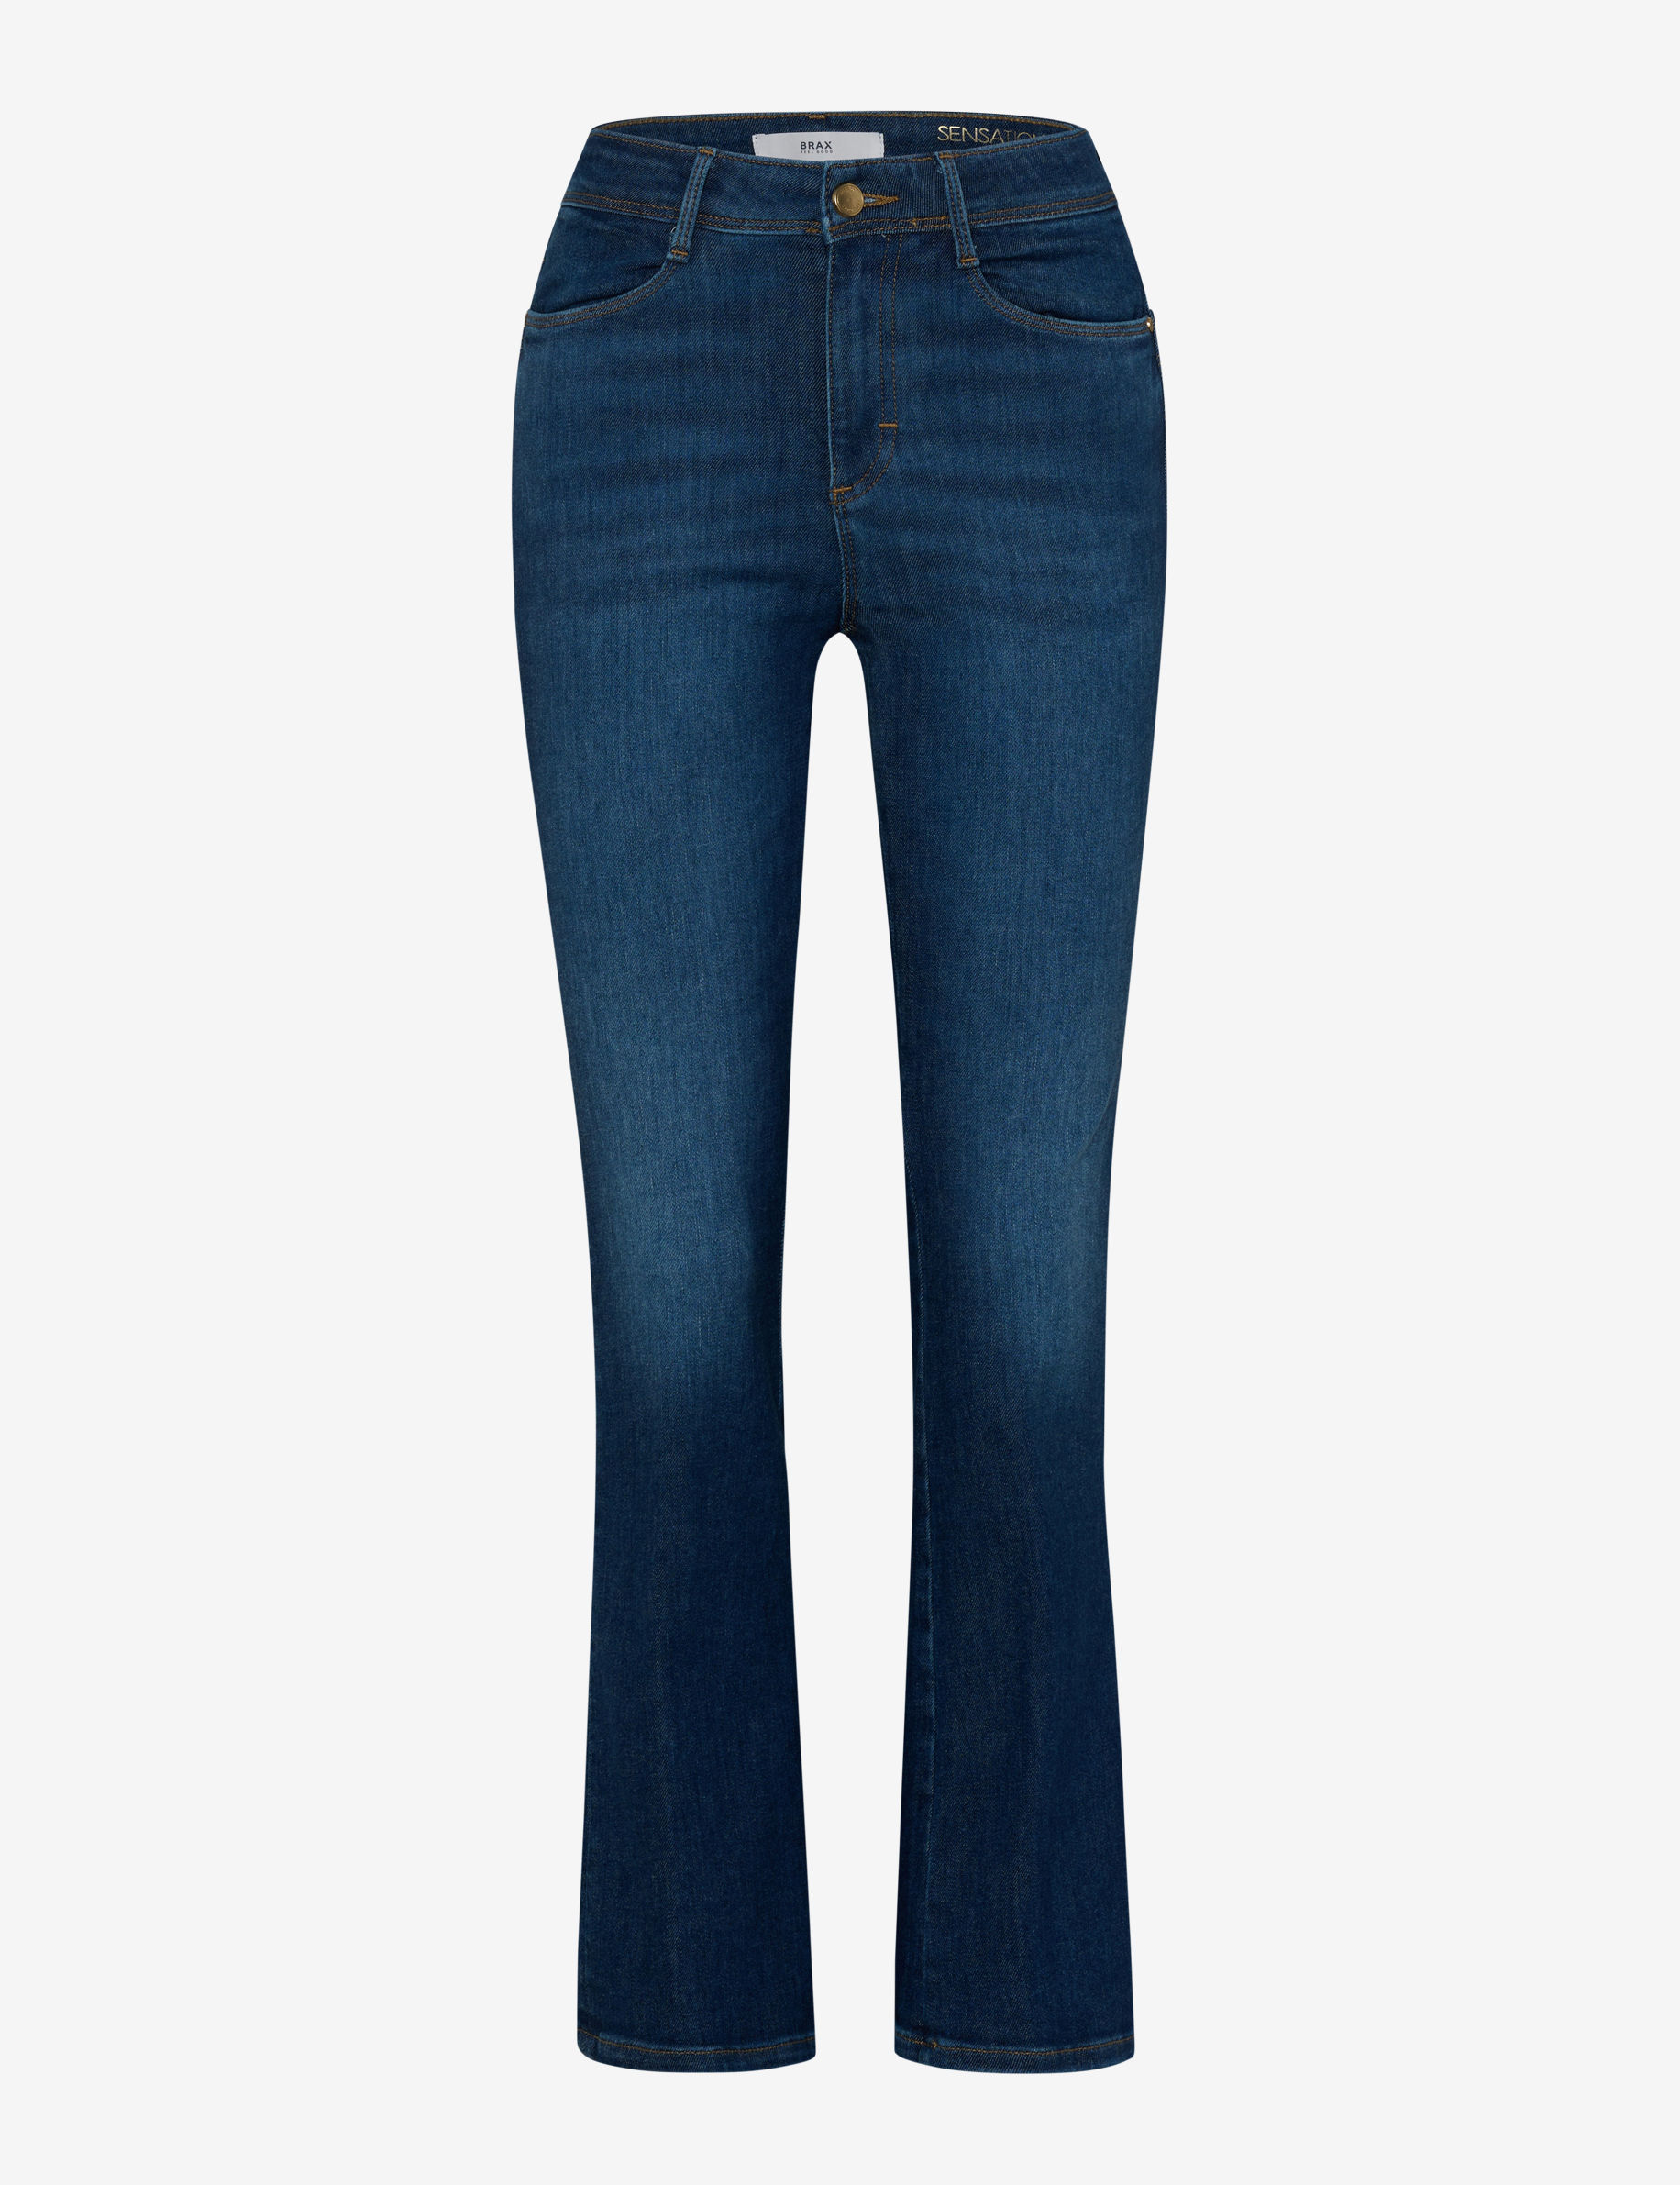 Women Style ANA S USED DARK BLUE Skinny Fit Stand-alone front view